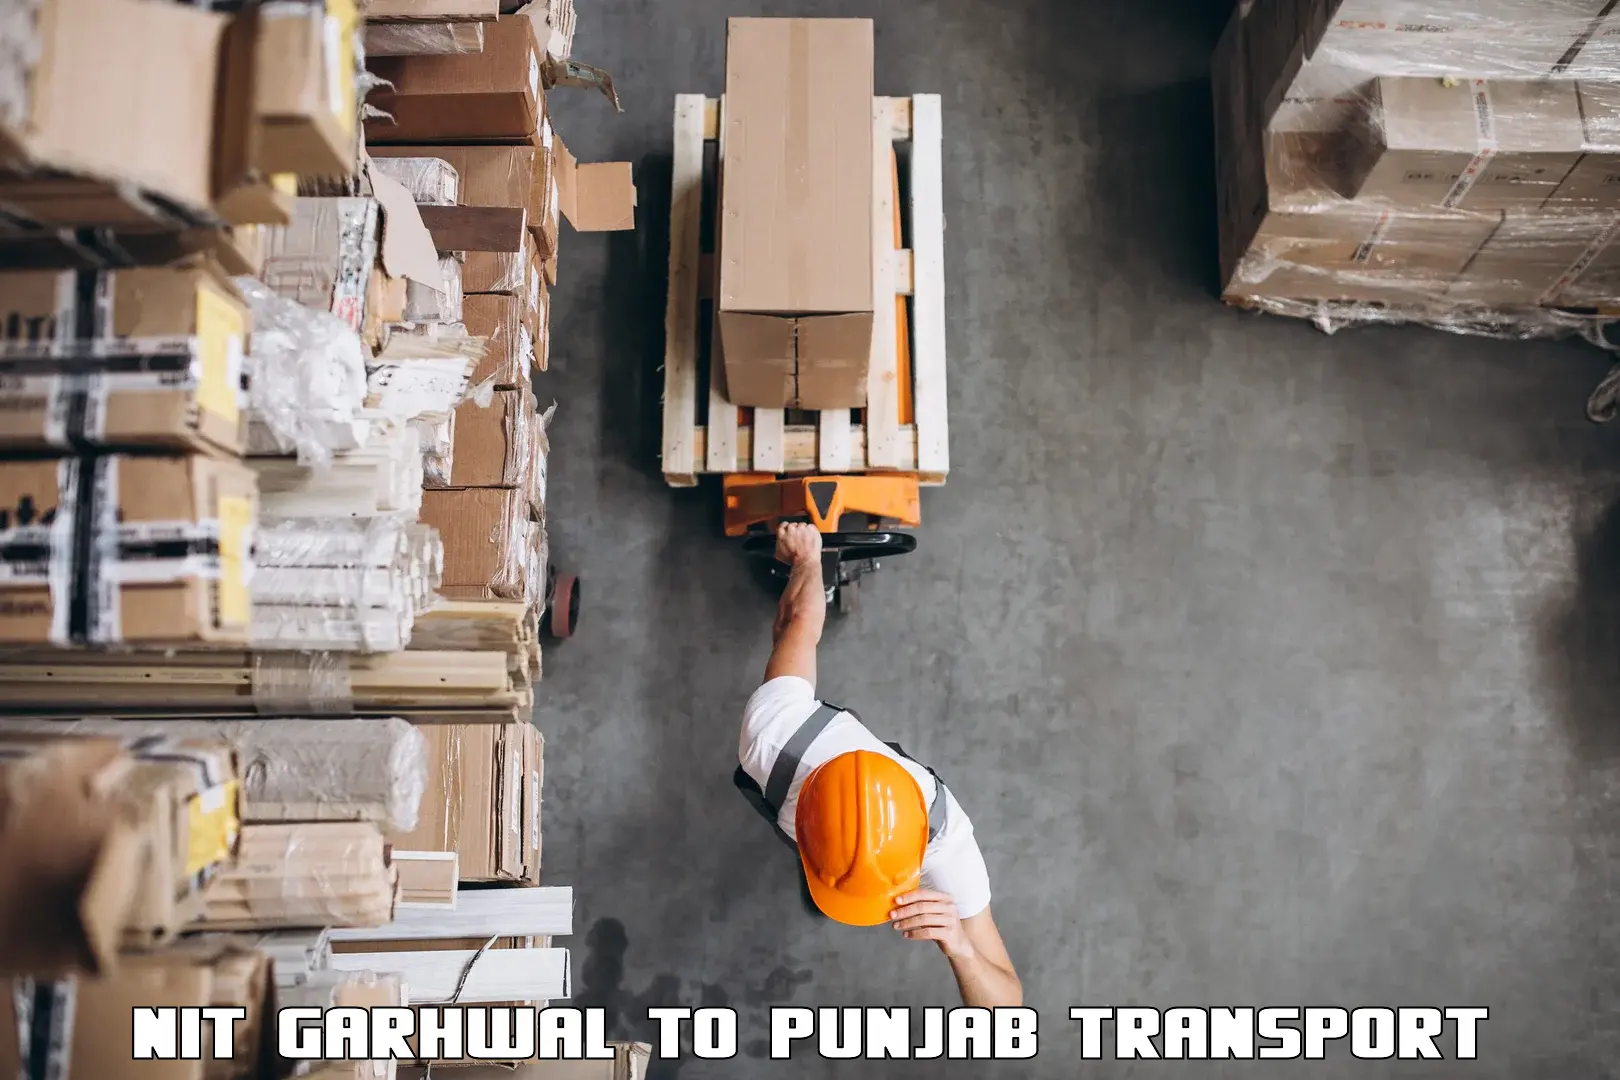 Daily parcel service transport NIT Garhwal to Bagha Purana